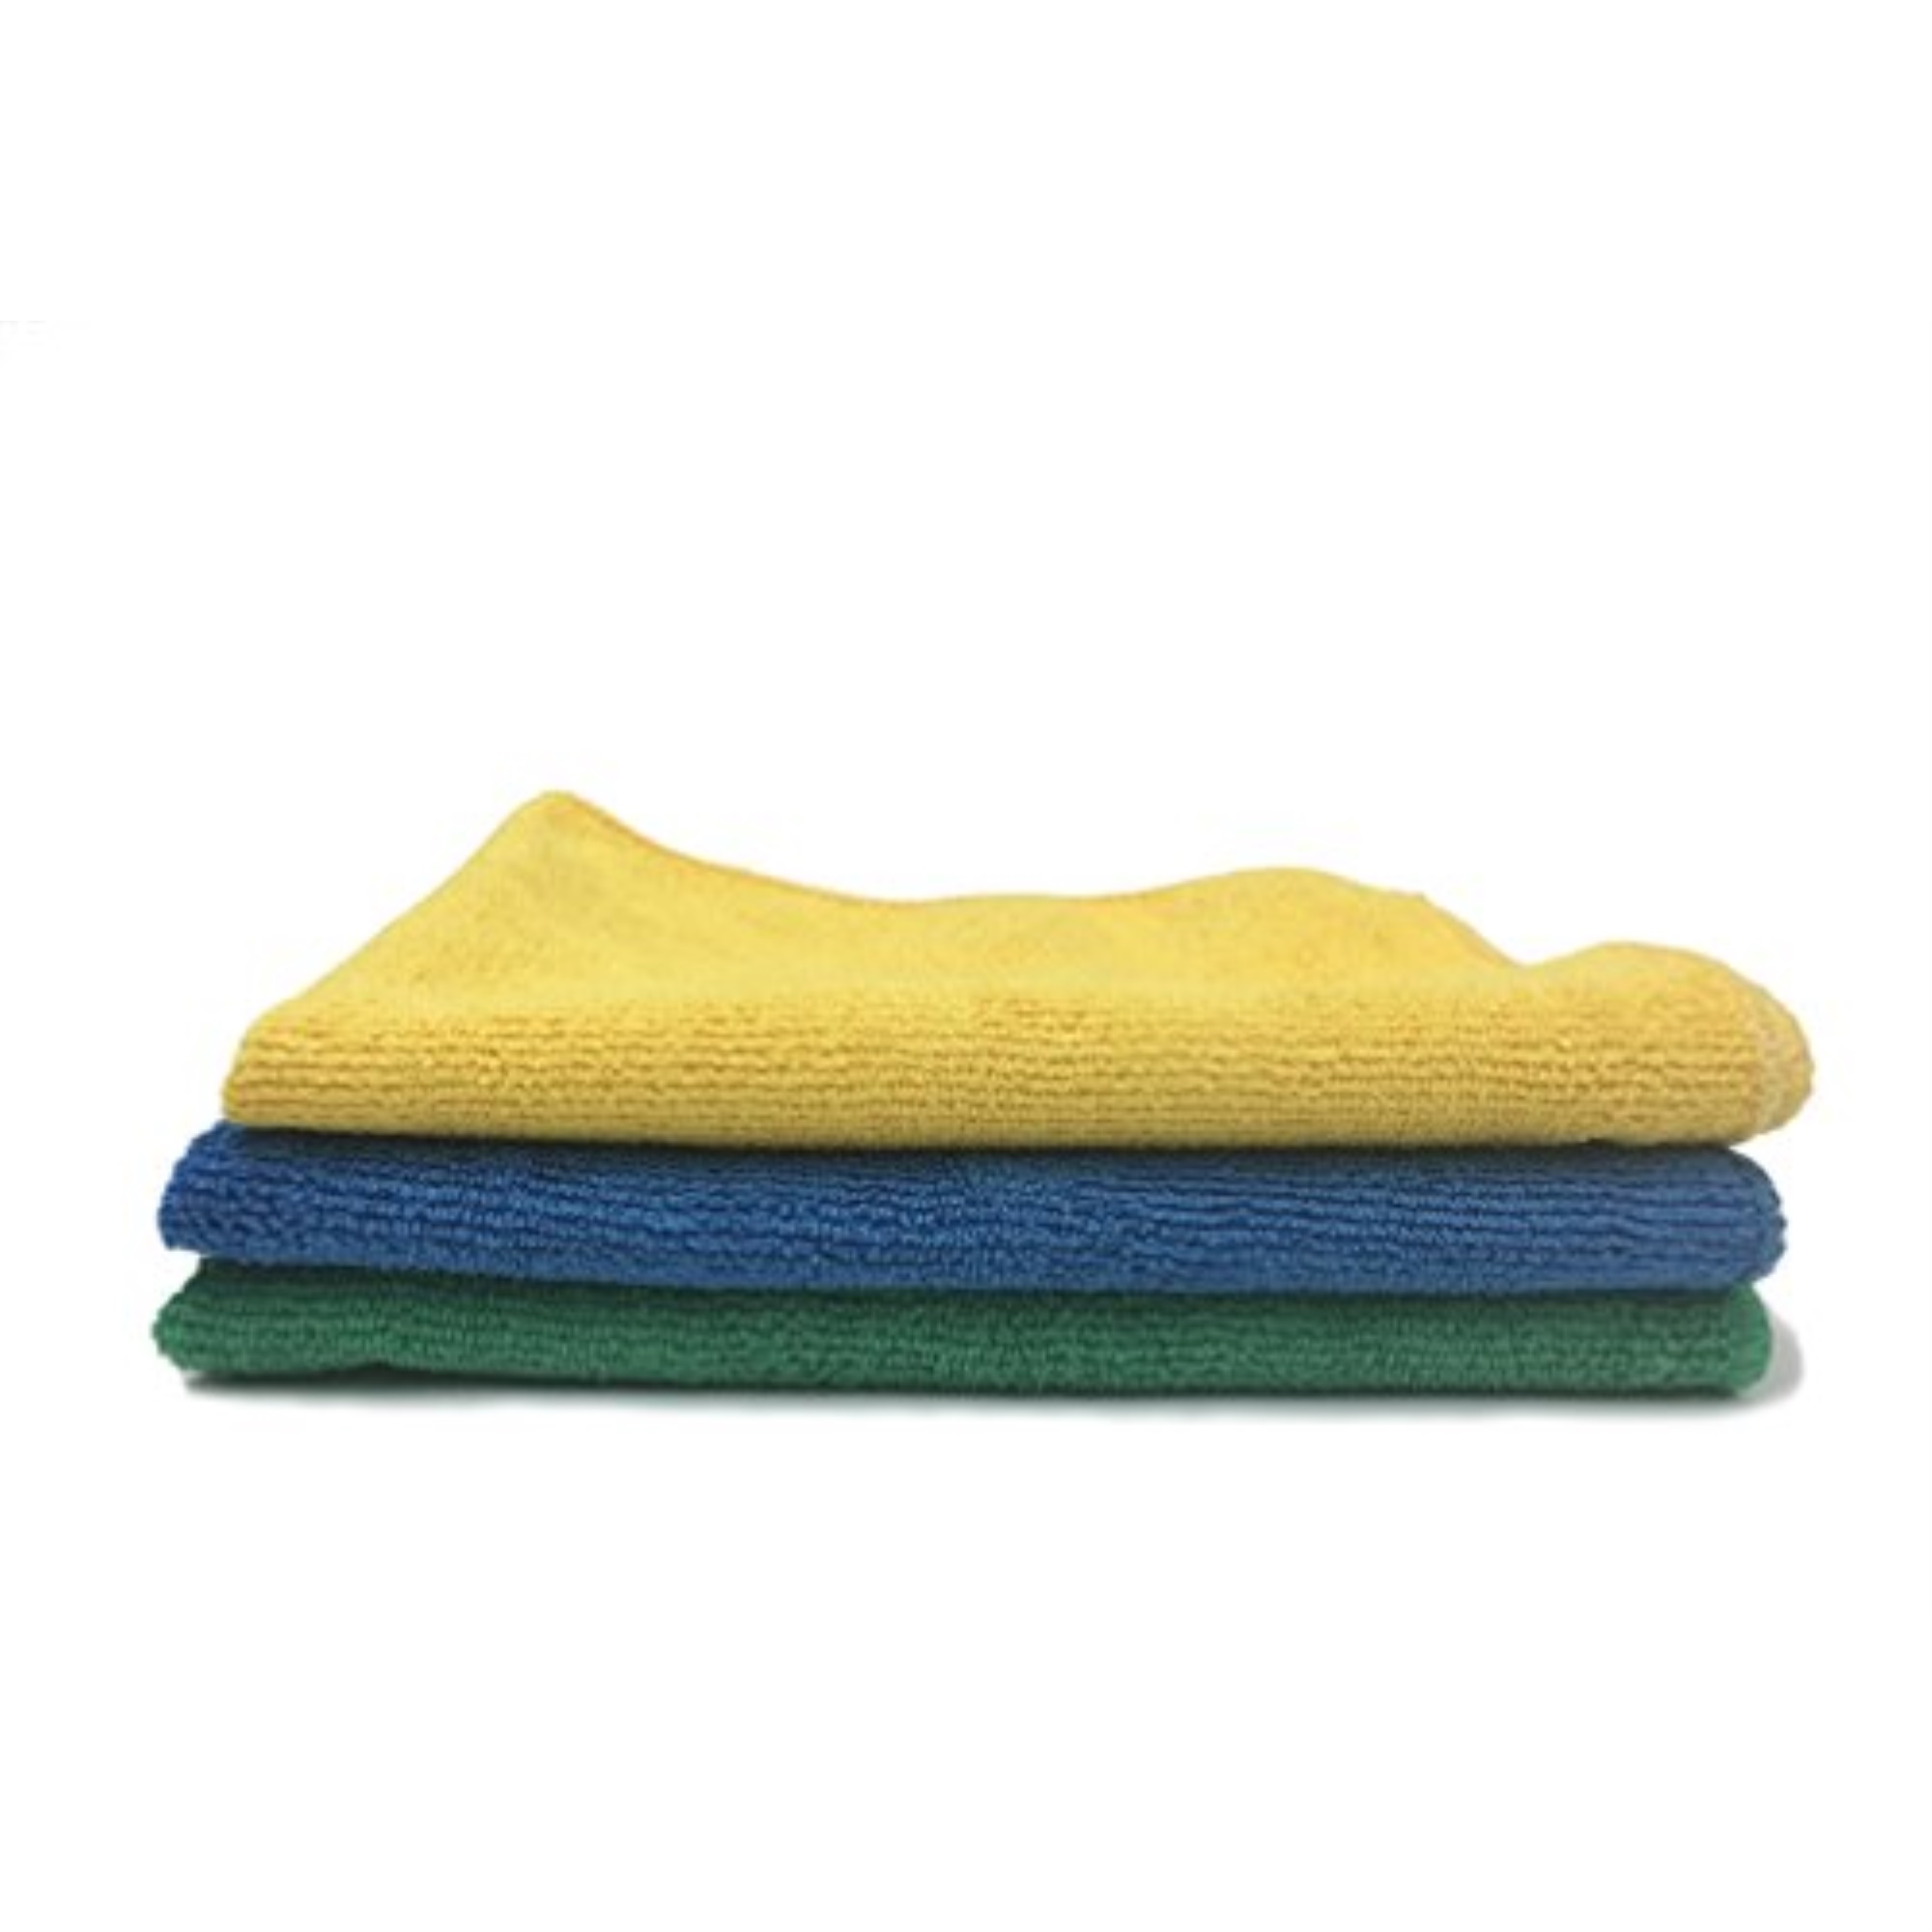 Viking 982300 Microfiber All-Purpose Auto Cleaning Cloth 3-Pack - image 1 of 2